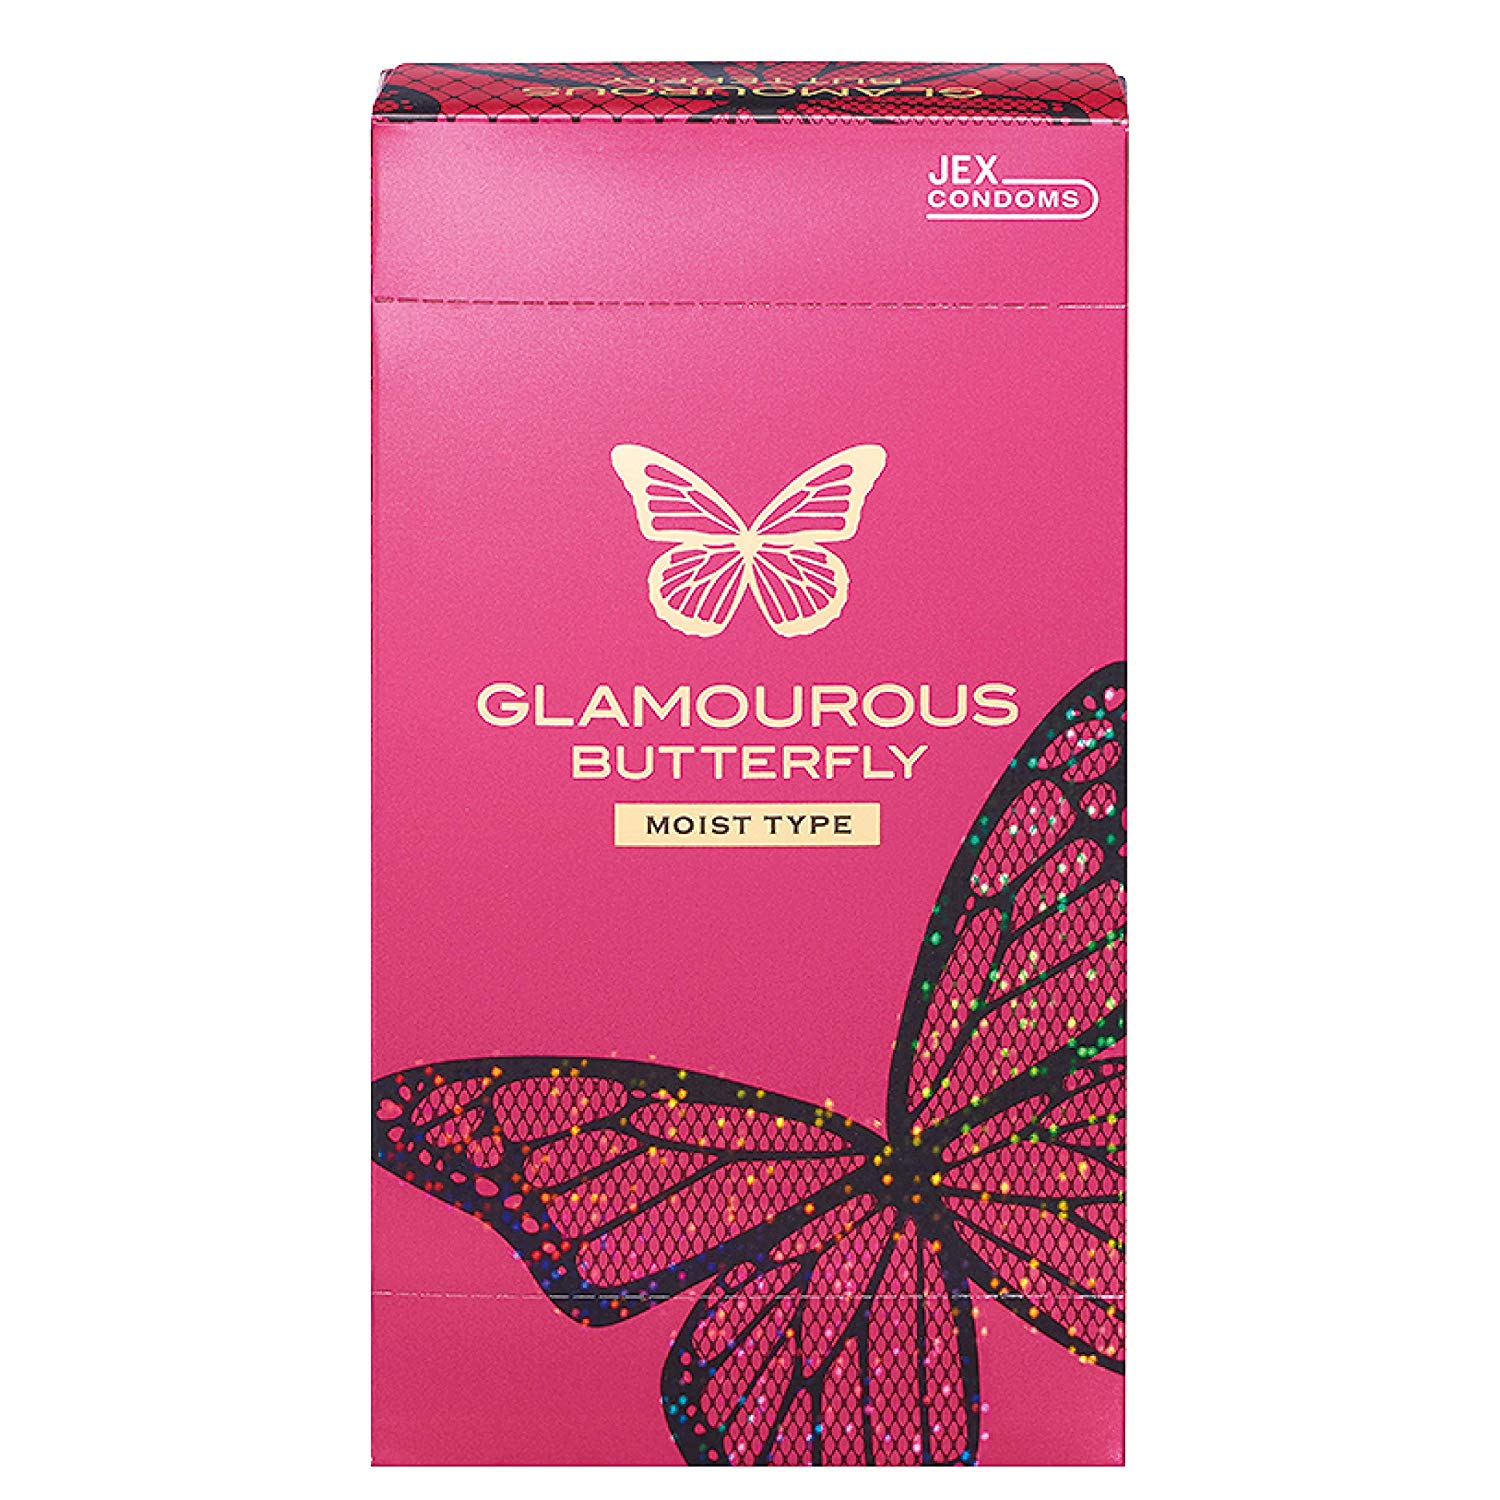 Jex Life Glamorous Butterfly Moist Type Choosing The Best Japanese Condom Brand For You Both